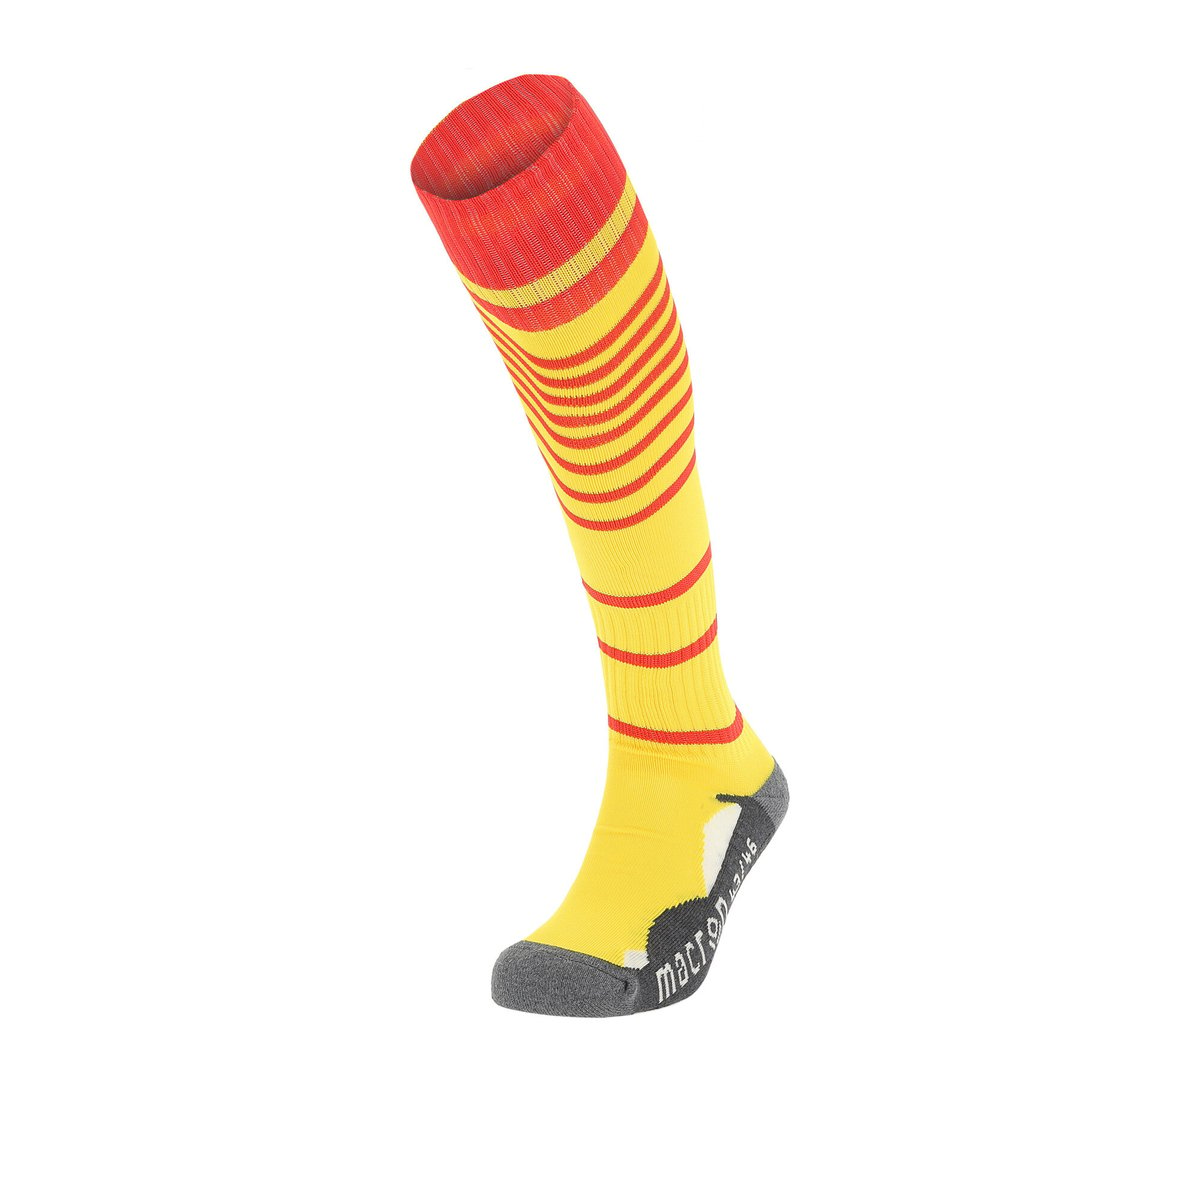 Macron Target Match Sock - Yellow/Red (Pack of 5)